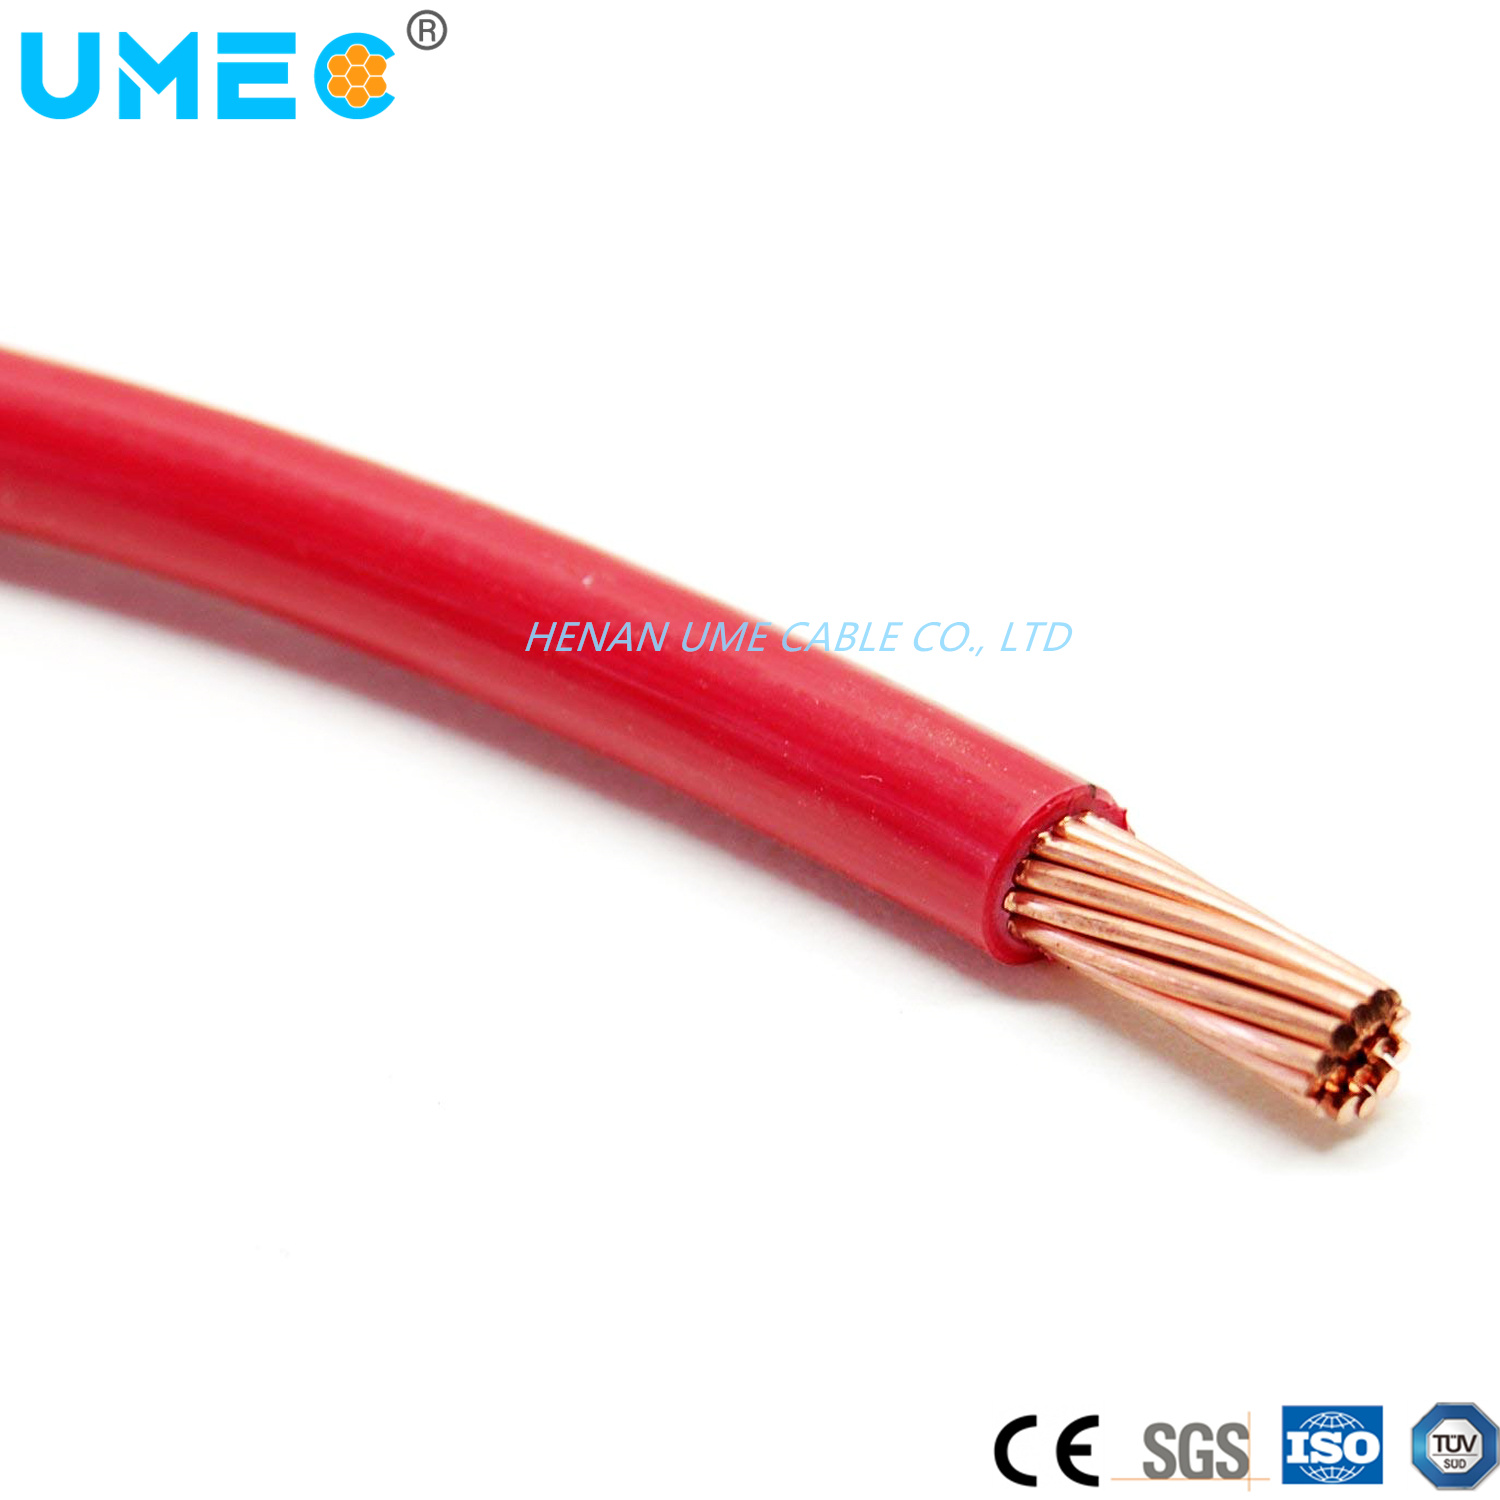 Support Customized PVC Coated Nylon Hook up Wire All Size 16AWG 18AWG 20AWG Electronic Instrument Lead Wire Thhn Thwn